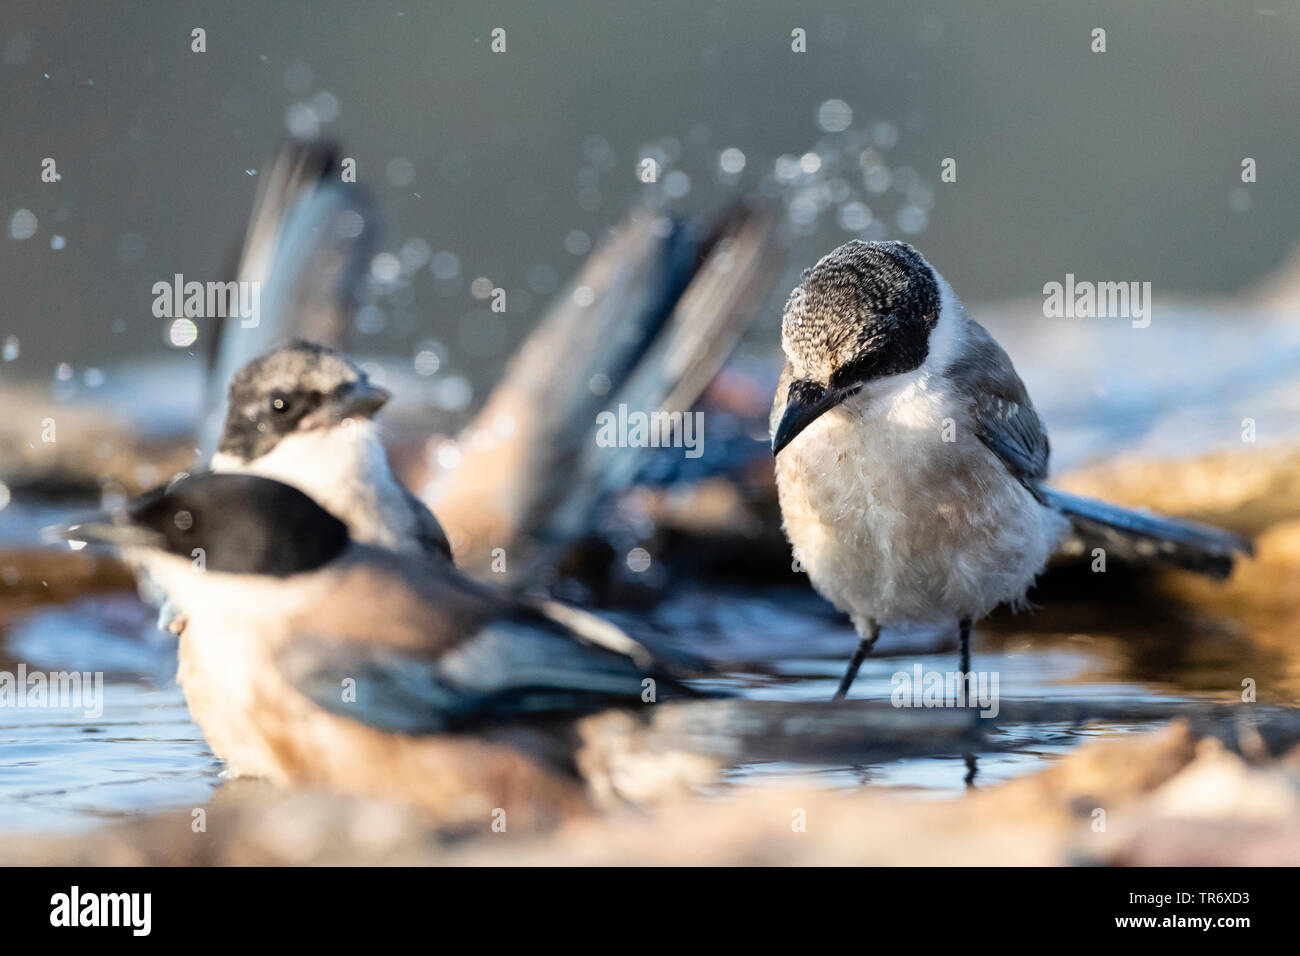 Iberian azure-winged magpie (Cyanopica cooki), three azure-winged magpies bathing in shallow water, Spain, Extremadura Stock Photo